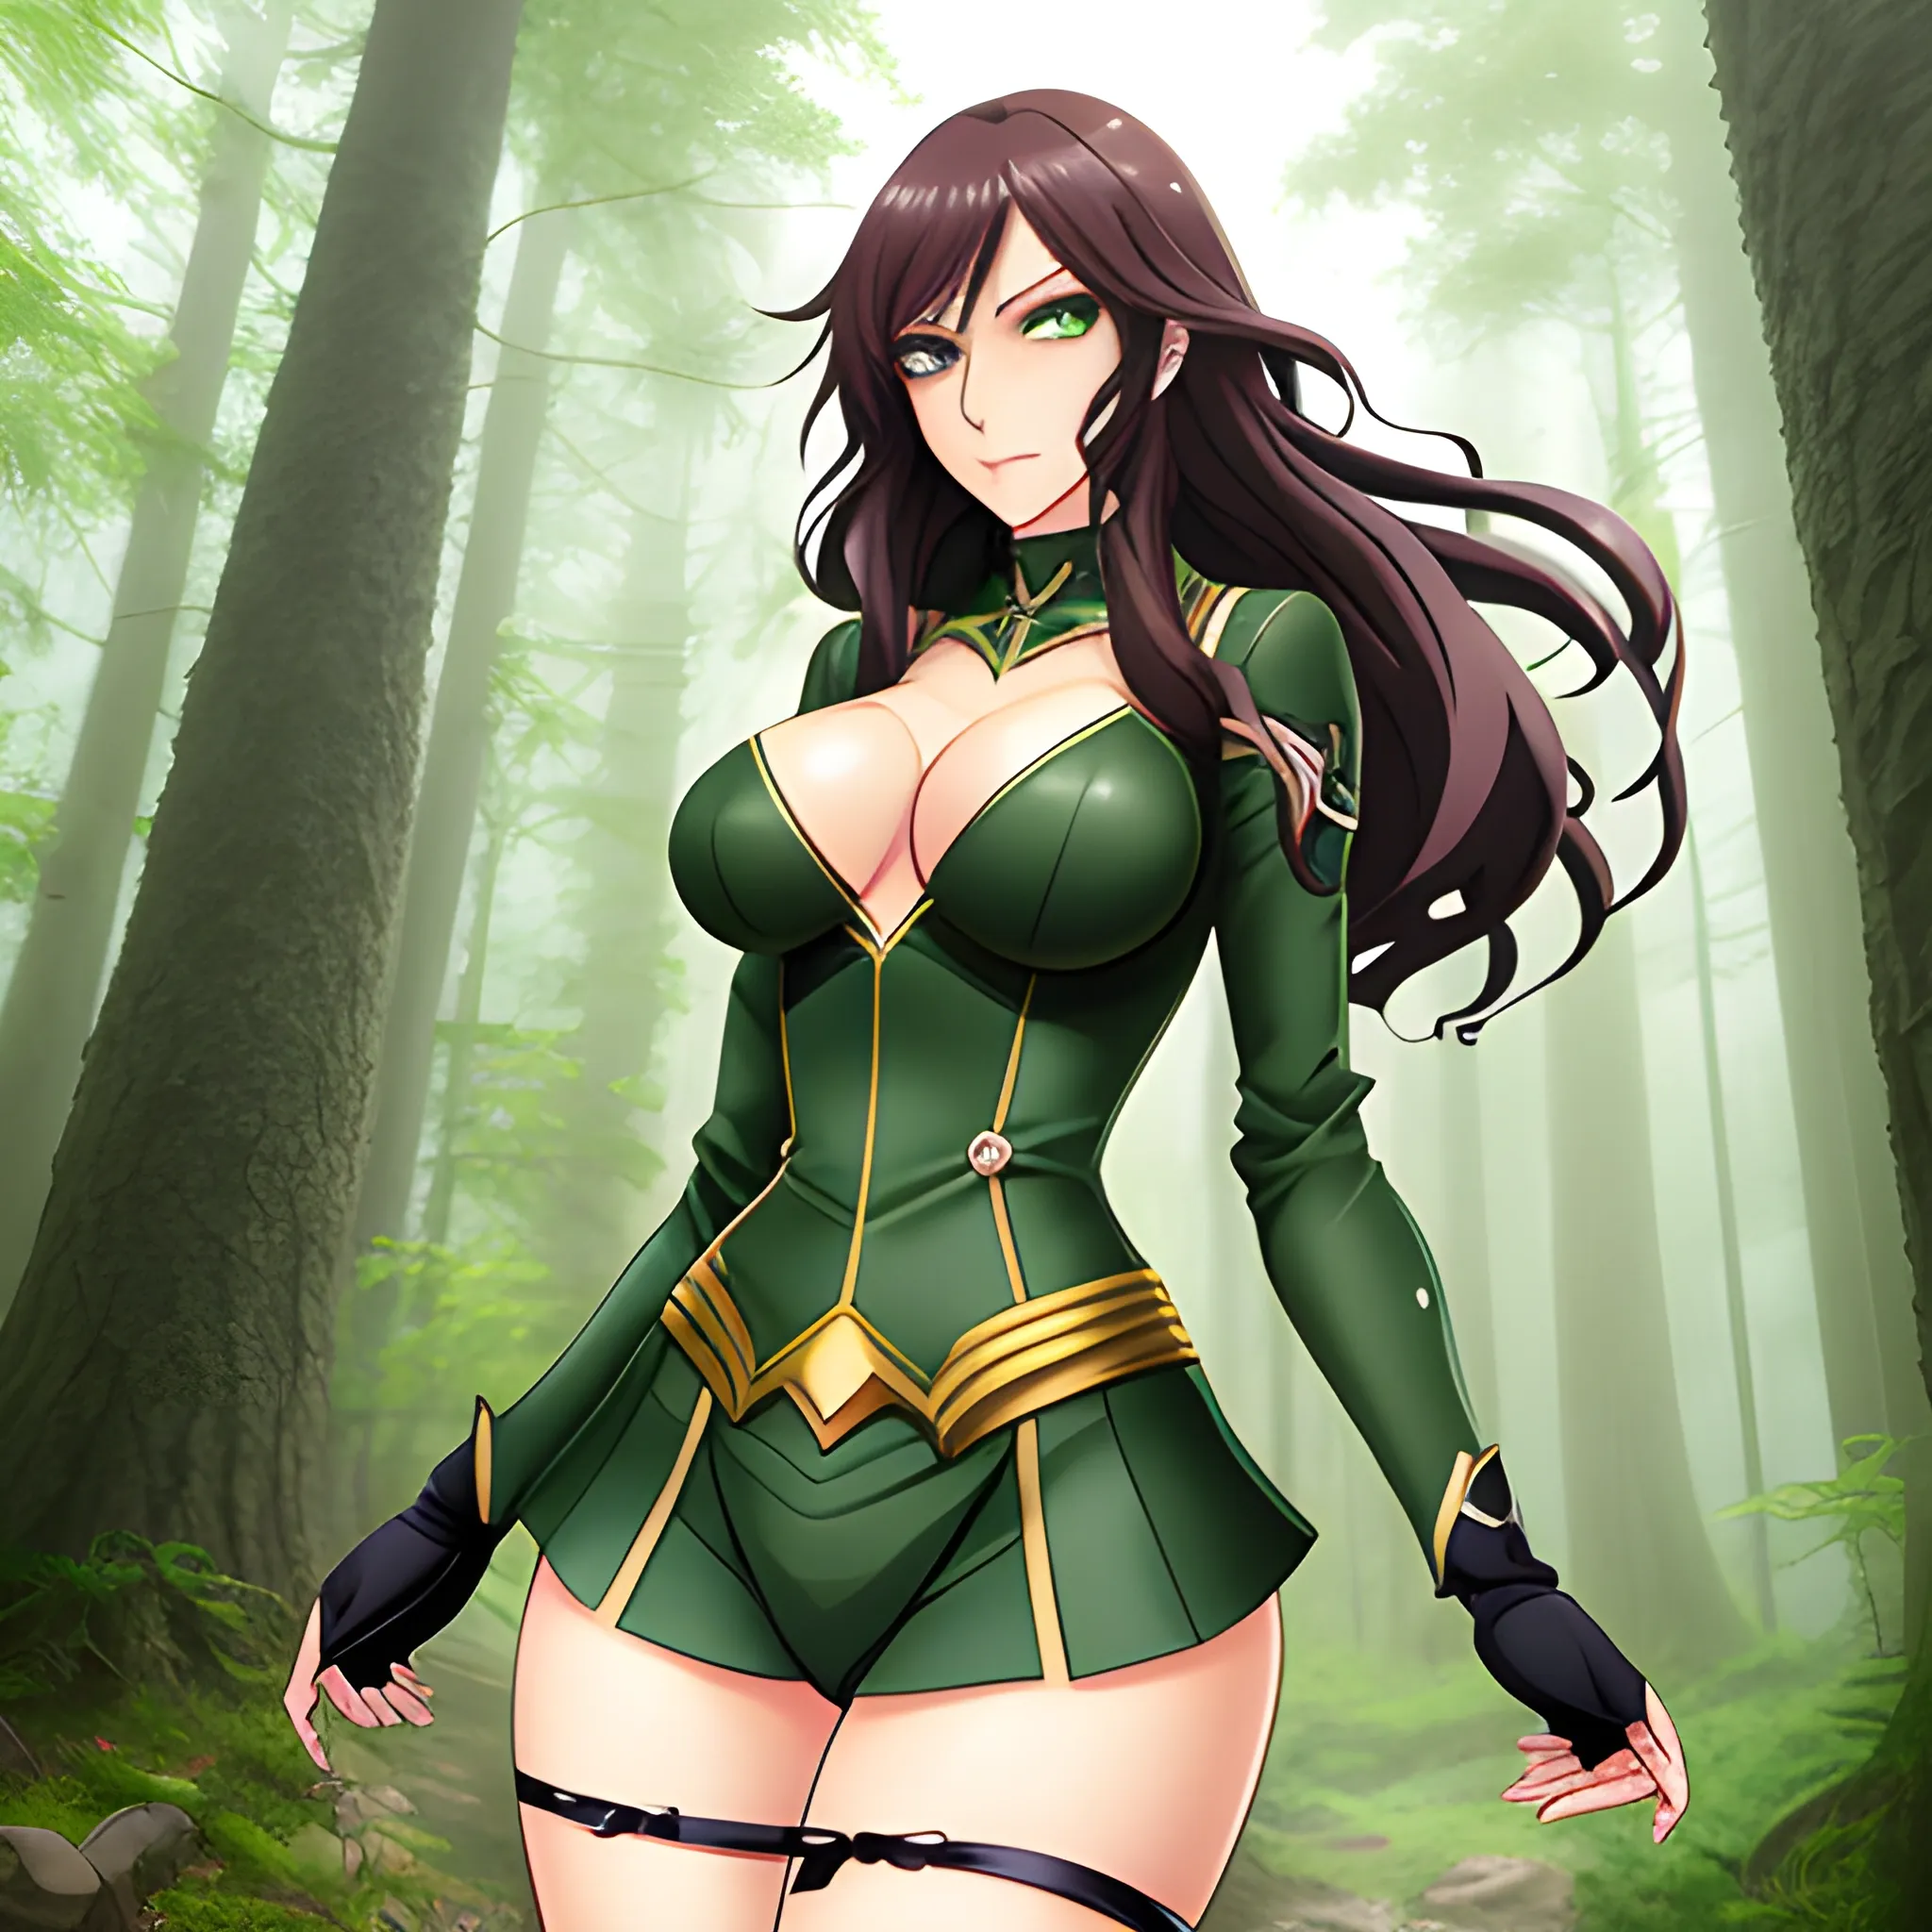 anime girl, heroine, perfect face, green eyes, lips, wavy hair, strong legs, tall height, fantasy, natural forest, perfect, realistic
